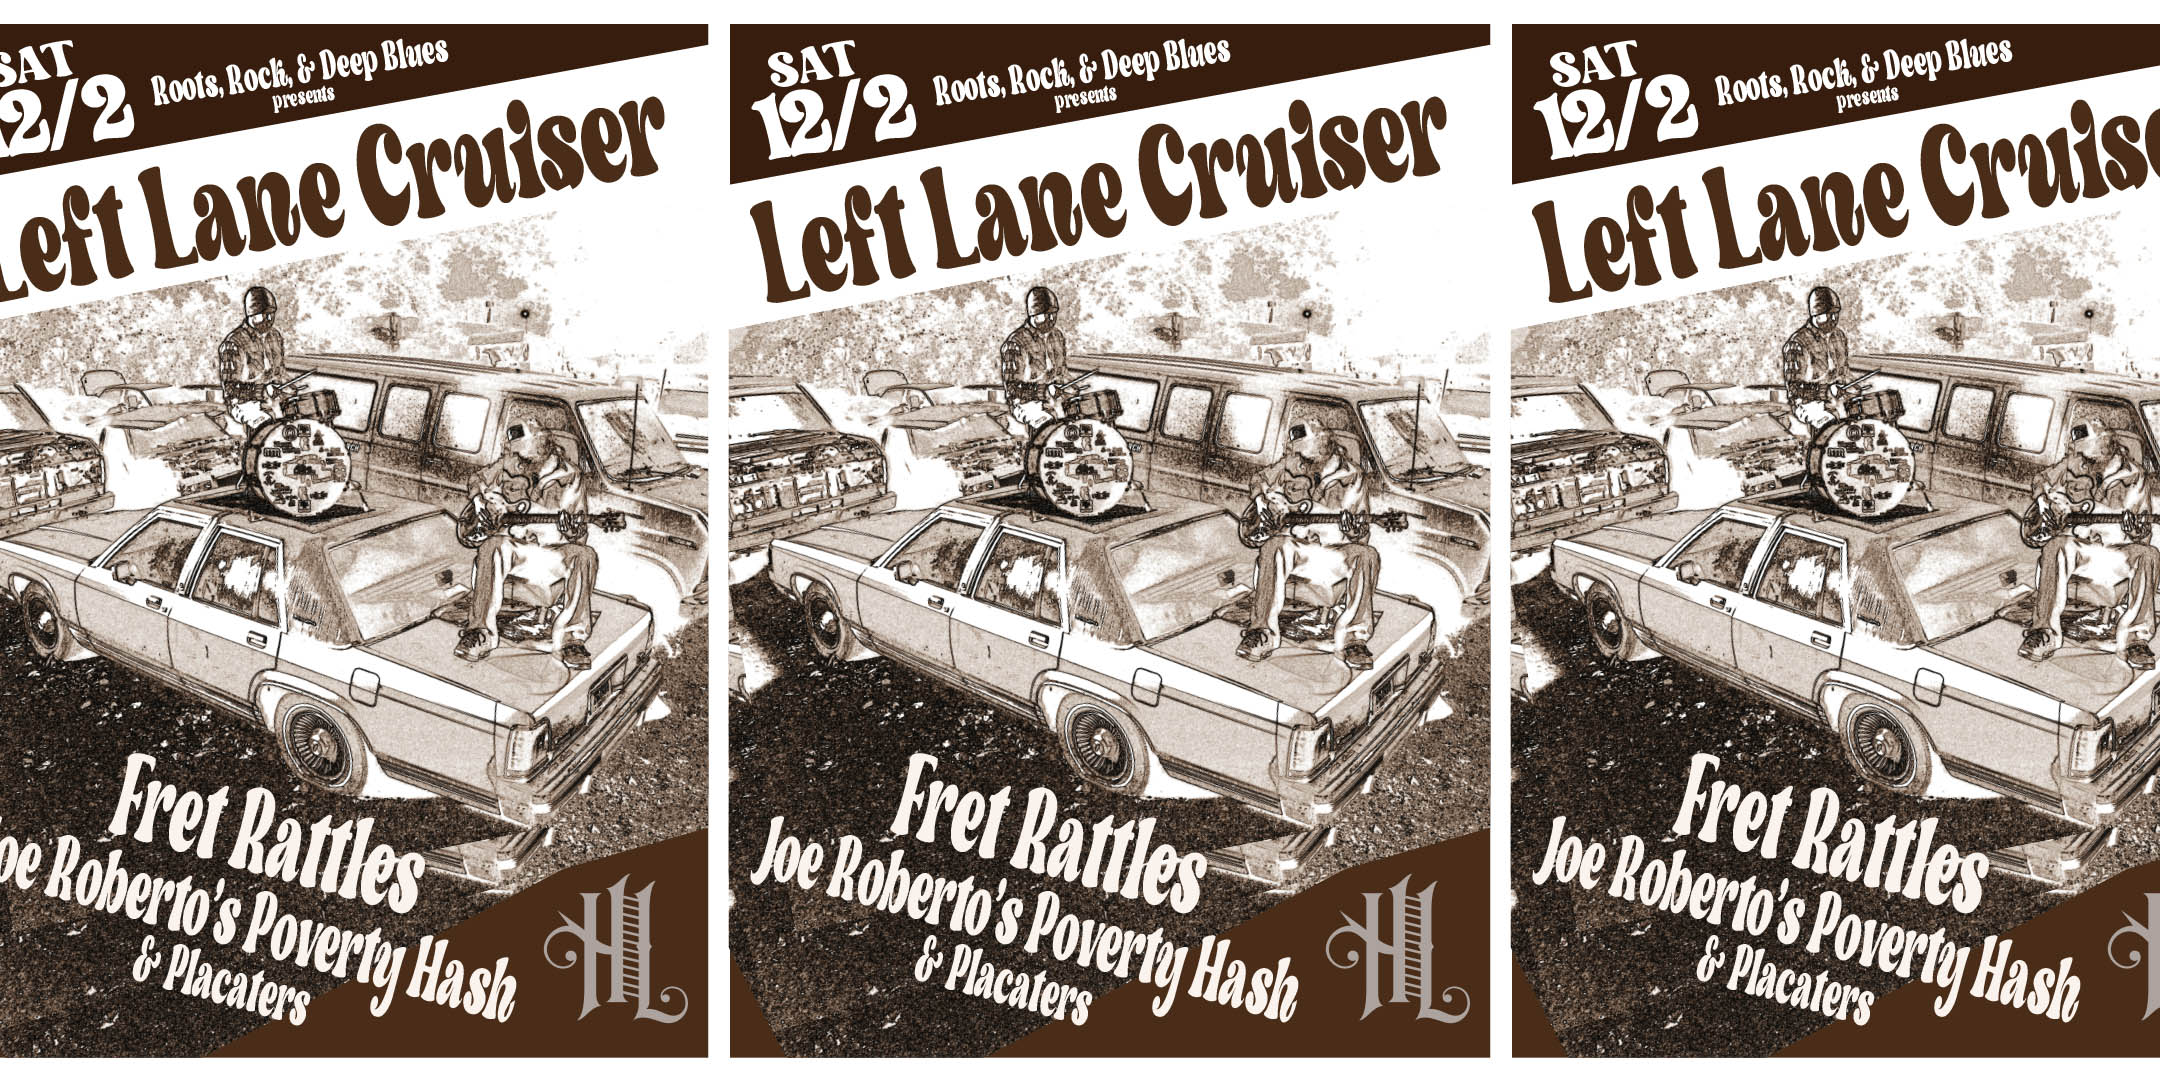 Roots, Rock, & Deep Blues presents Left Lane Cruiser with Fret Rattles, Joe Roberto’s Poverty Hash, and Placaters Saturday, December 2, 2023 The Hook and Ladder Theater Doors 7:30pm :: Music 8:00pm :: 21+ General Admission*: $15 ADV / $20 ADV *Does not include fees NO REFUNDS